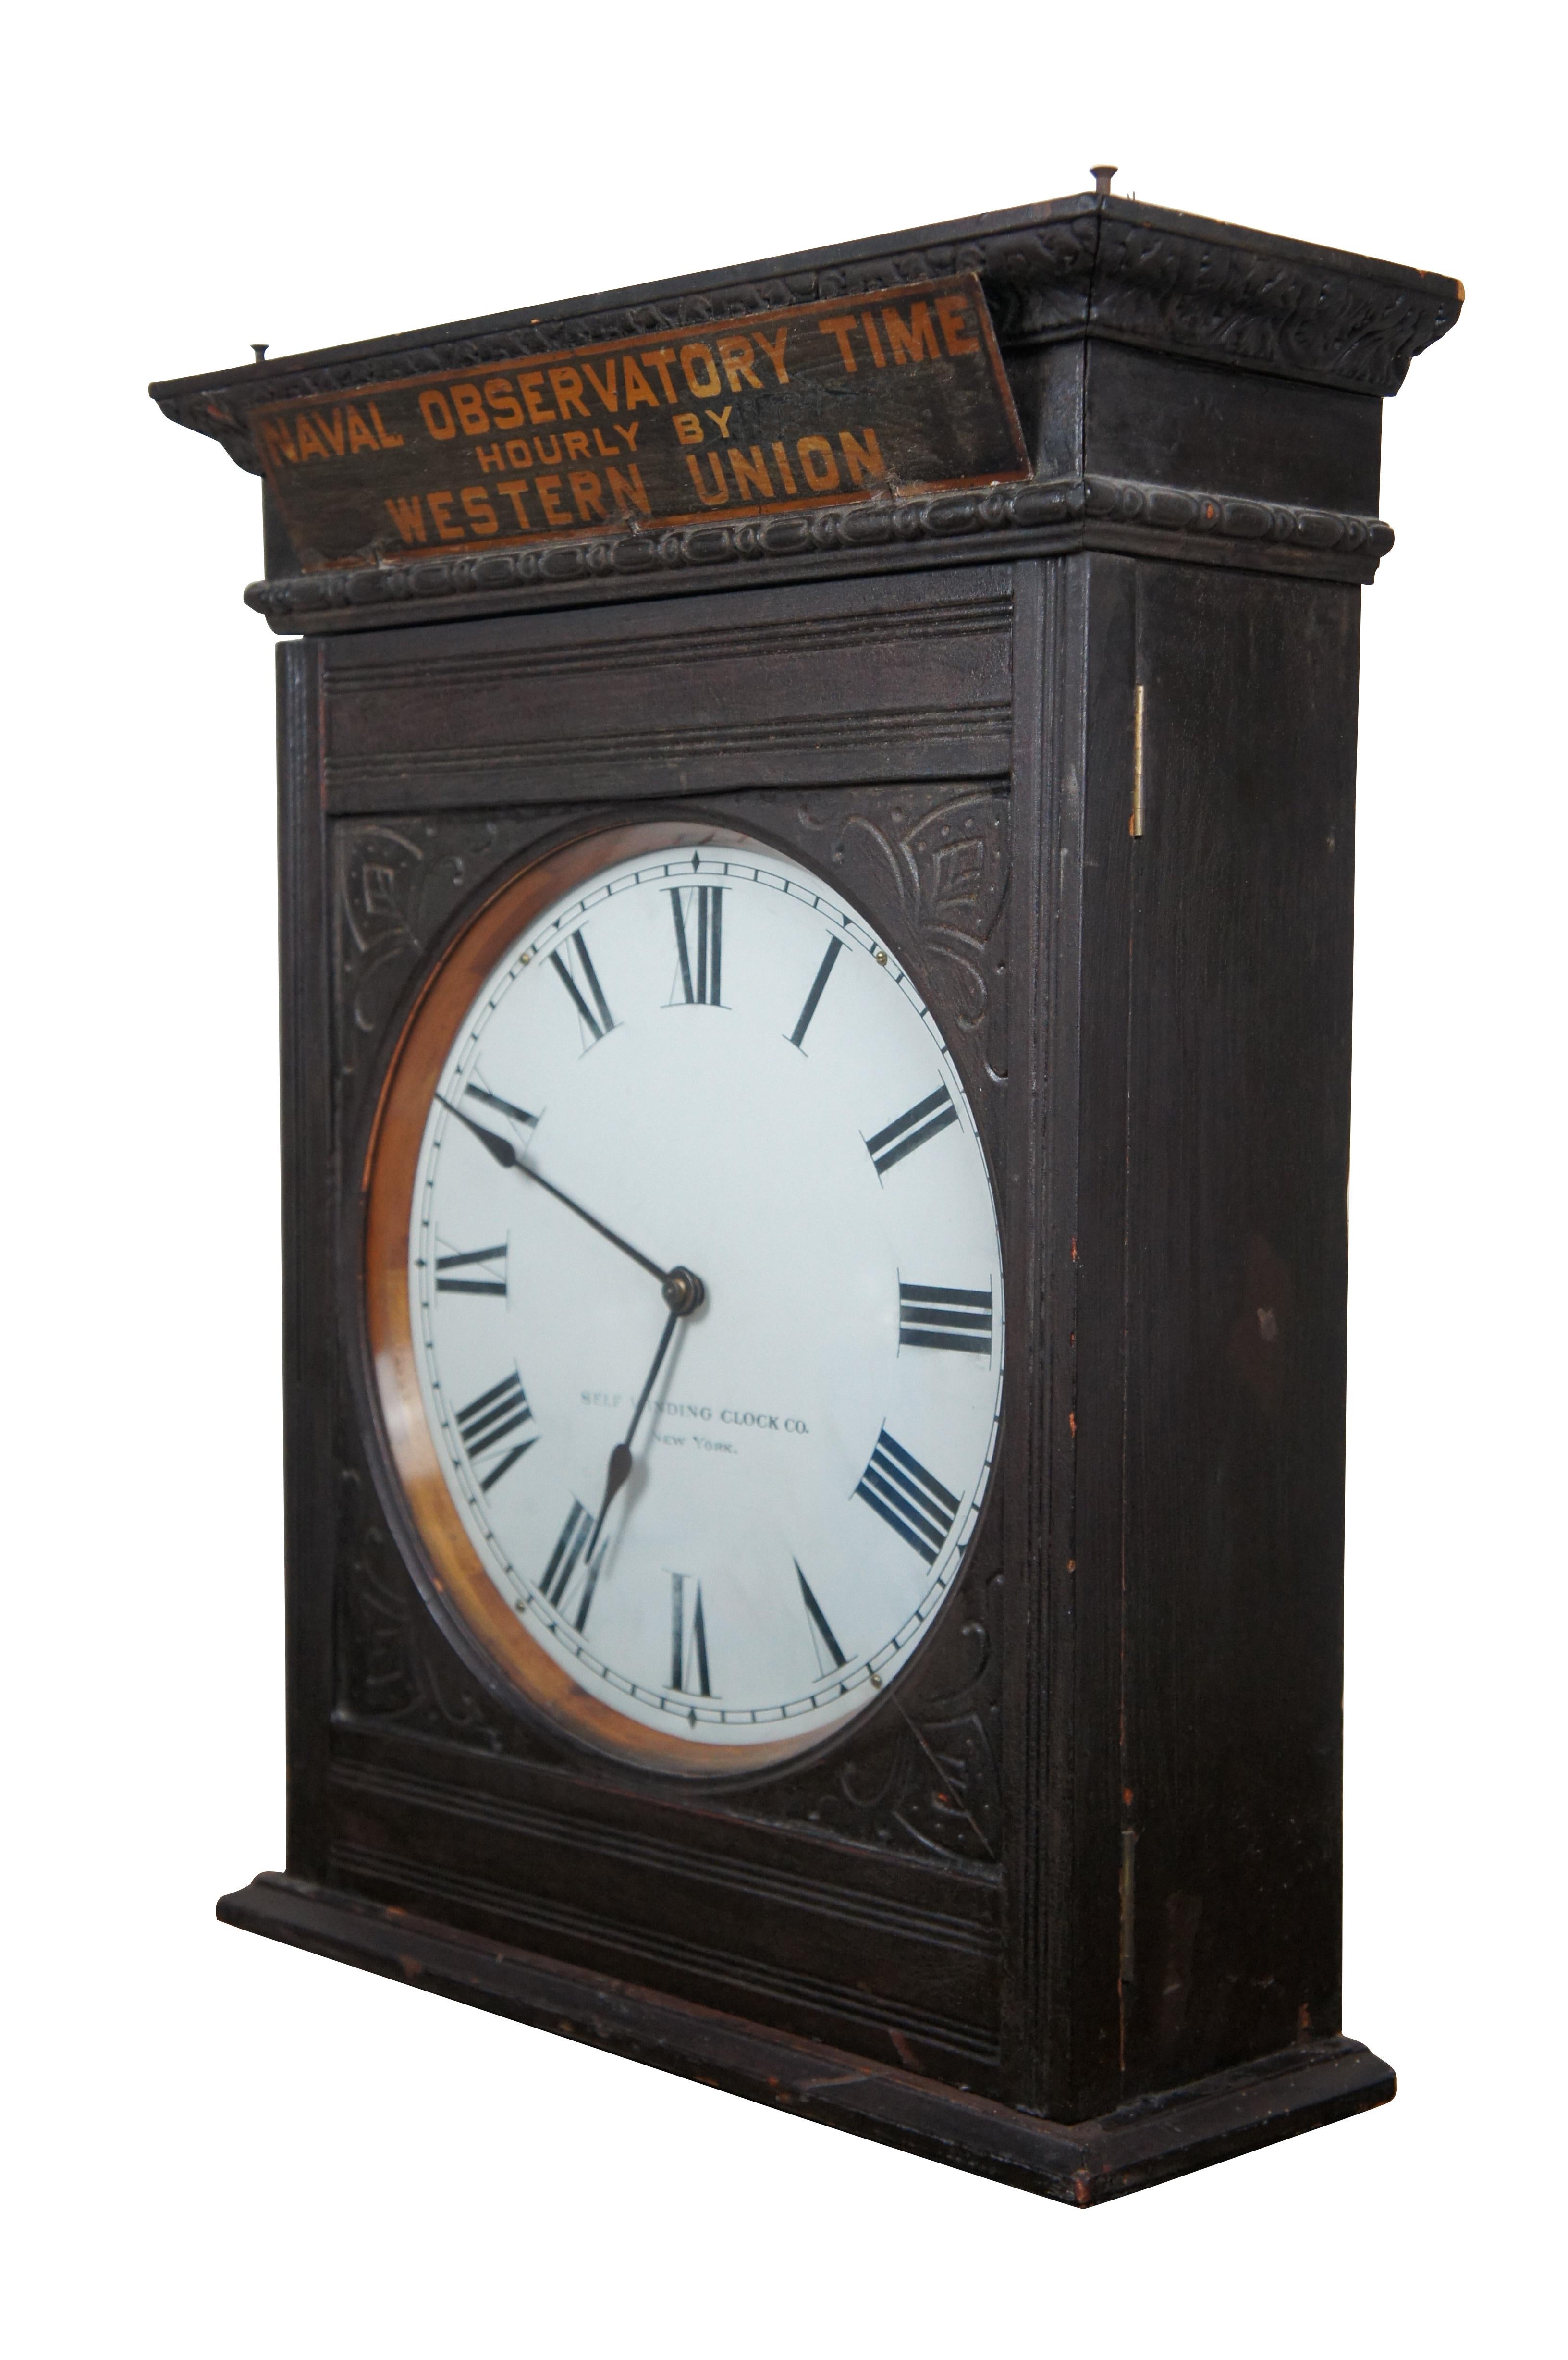 Antique Western Union, Naval Observatory Time, self winding clock. Features a tall wooden case with carved corners and pediment mounted with tin sign reading 